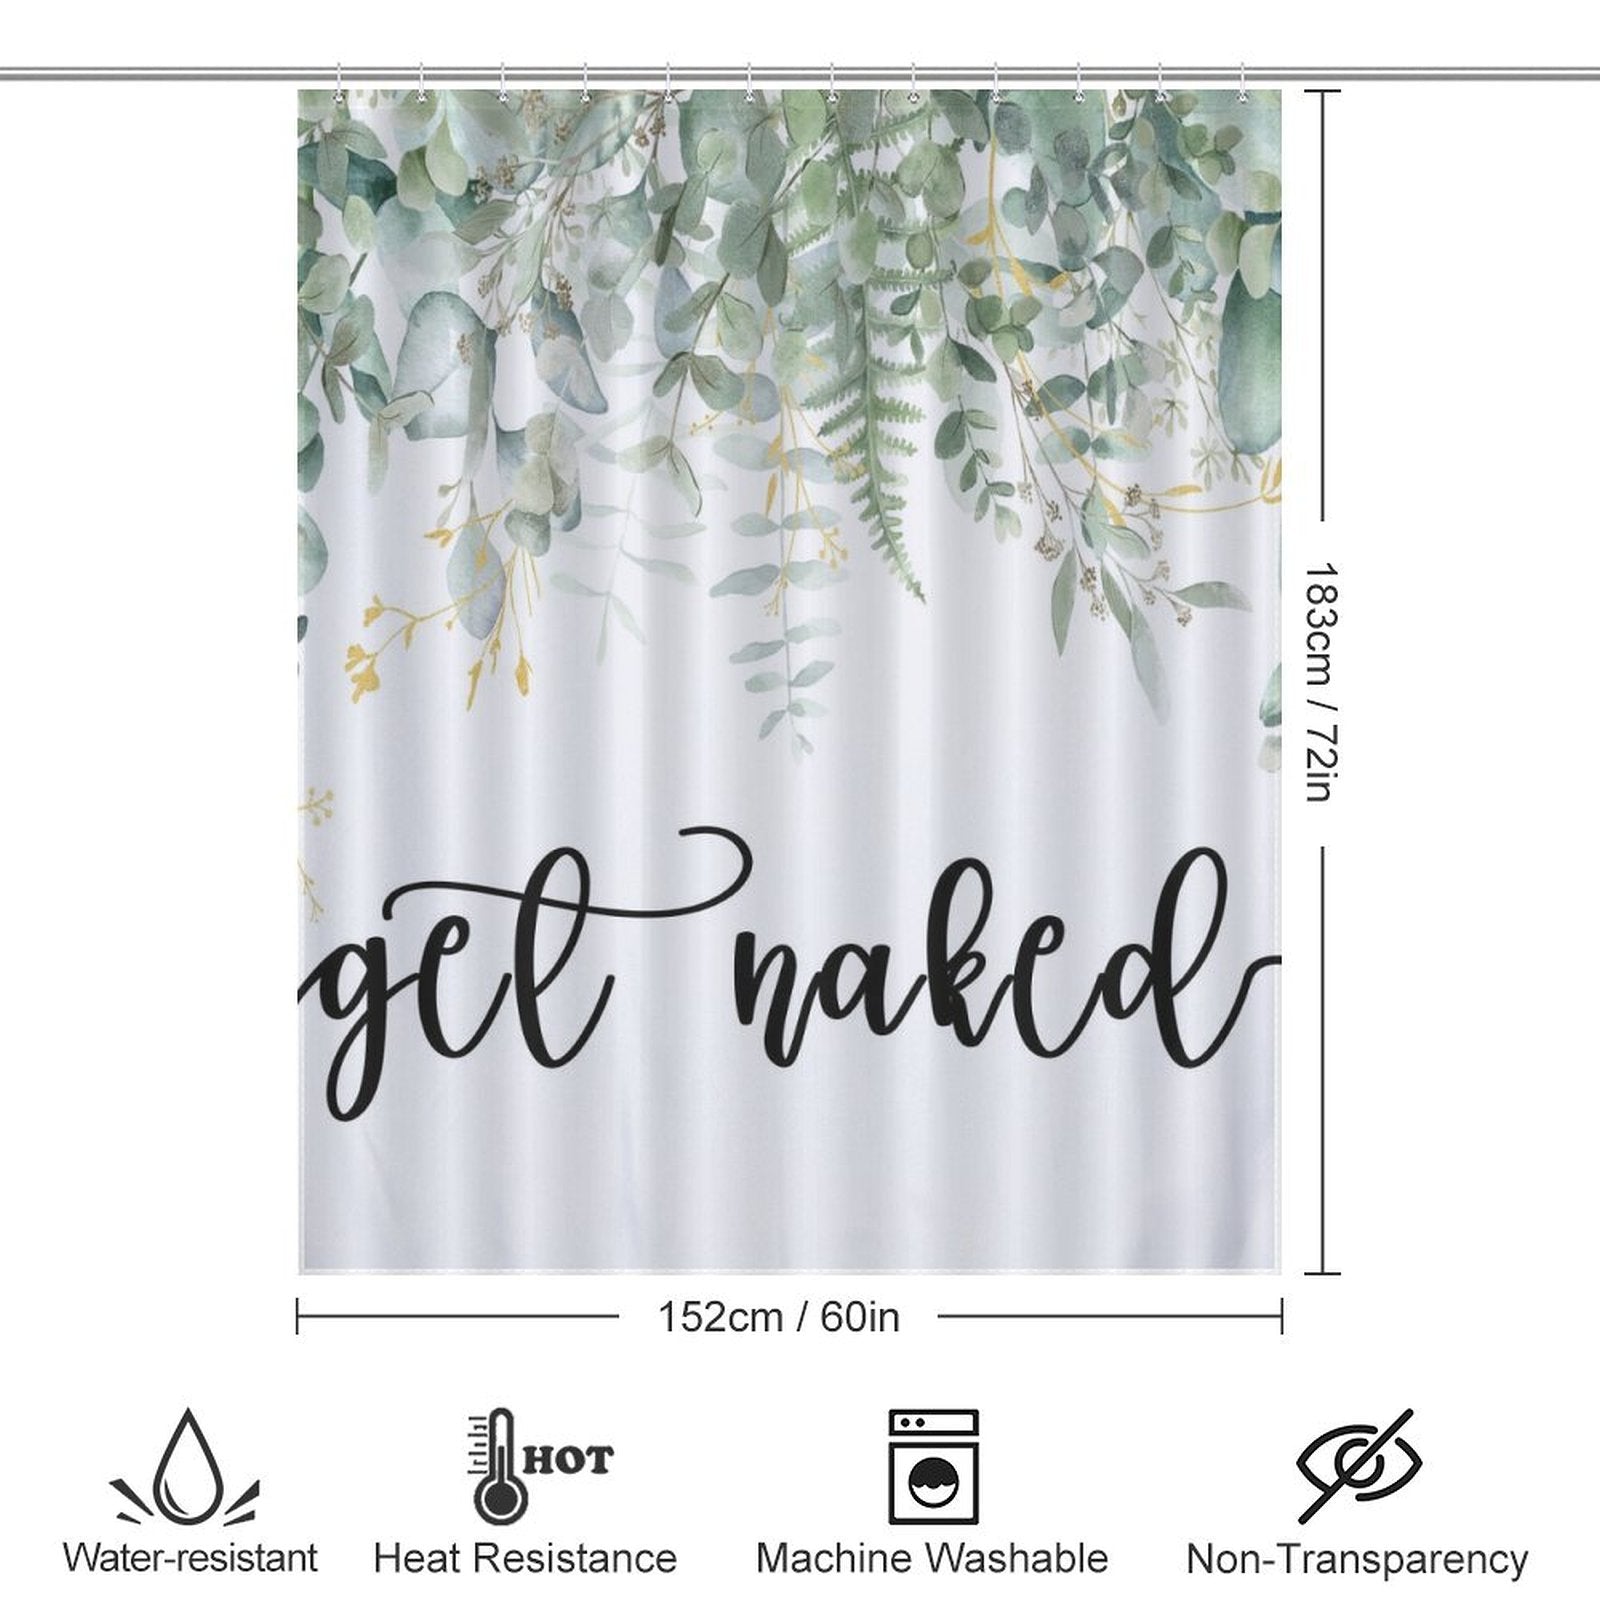 A white "Get Naked Funny Letters Eucalyptus Leaves Print Shower Curtain-Cottoncat" with a eucalyptus leaves print at the top features the text in black cursive. Measuring 183 cm by 152 cm, this chic piece of bathroom decor is water-resistant, heat-resistant, machine washable, and non-transparent.